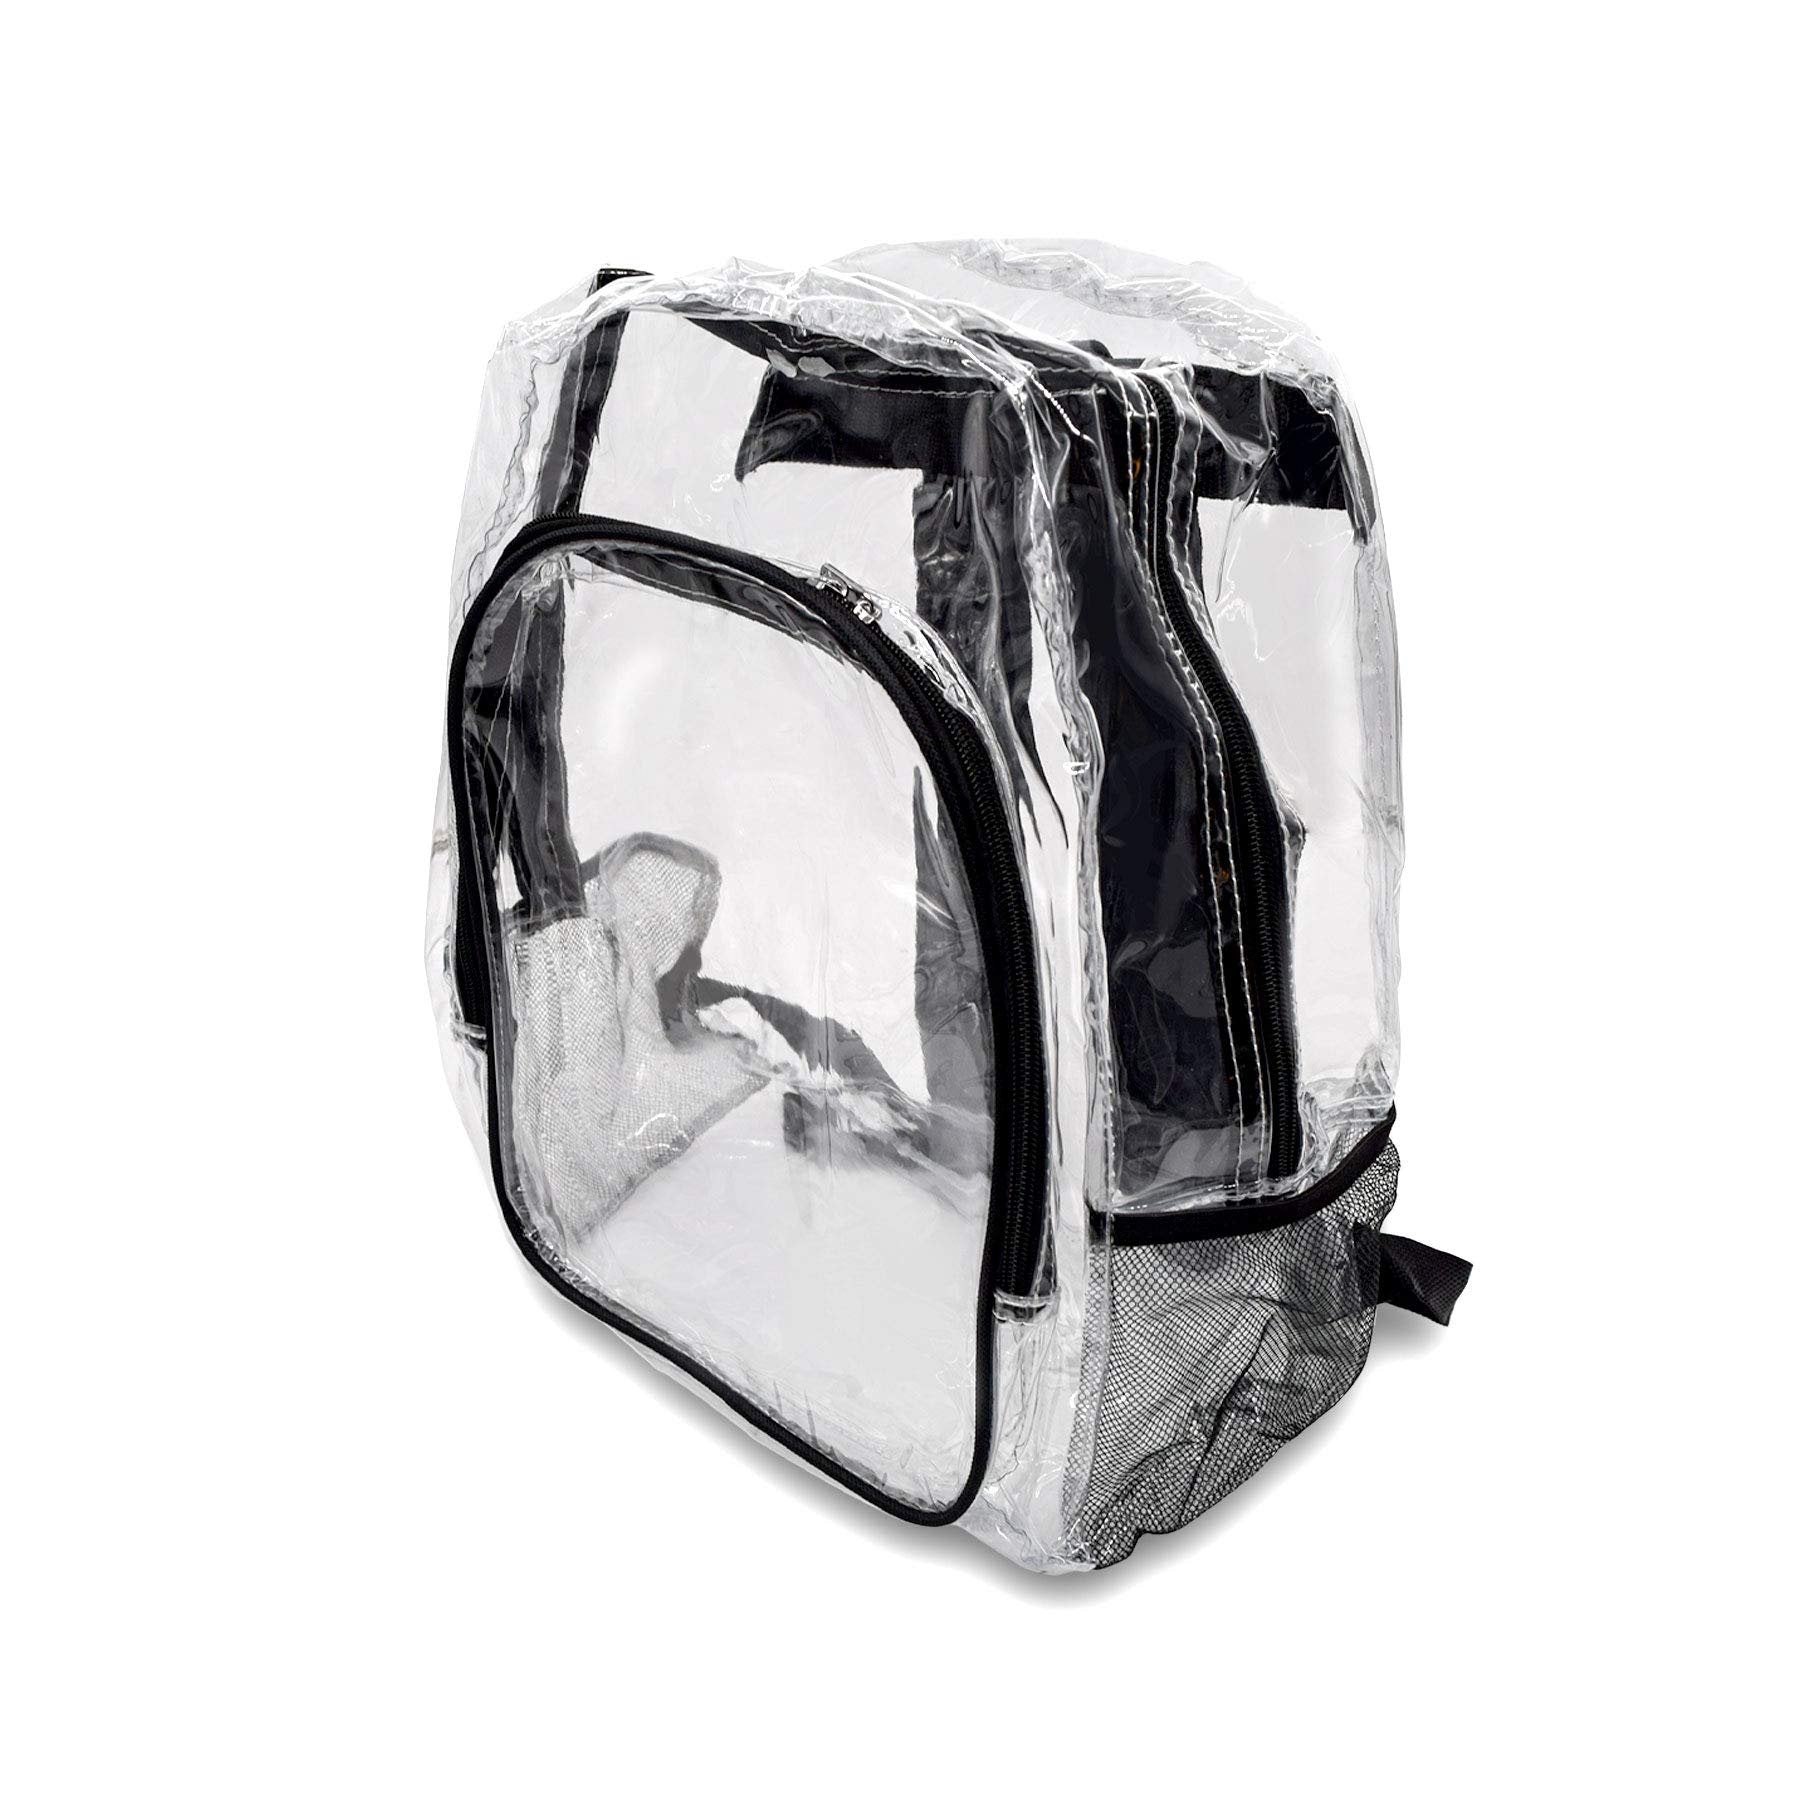 Clear Heavy Duty Backpack - Small Transparent Zippered Bookbag for School, Stadium, Events, 16.5x12.6x6.3